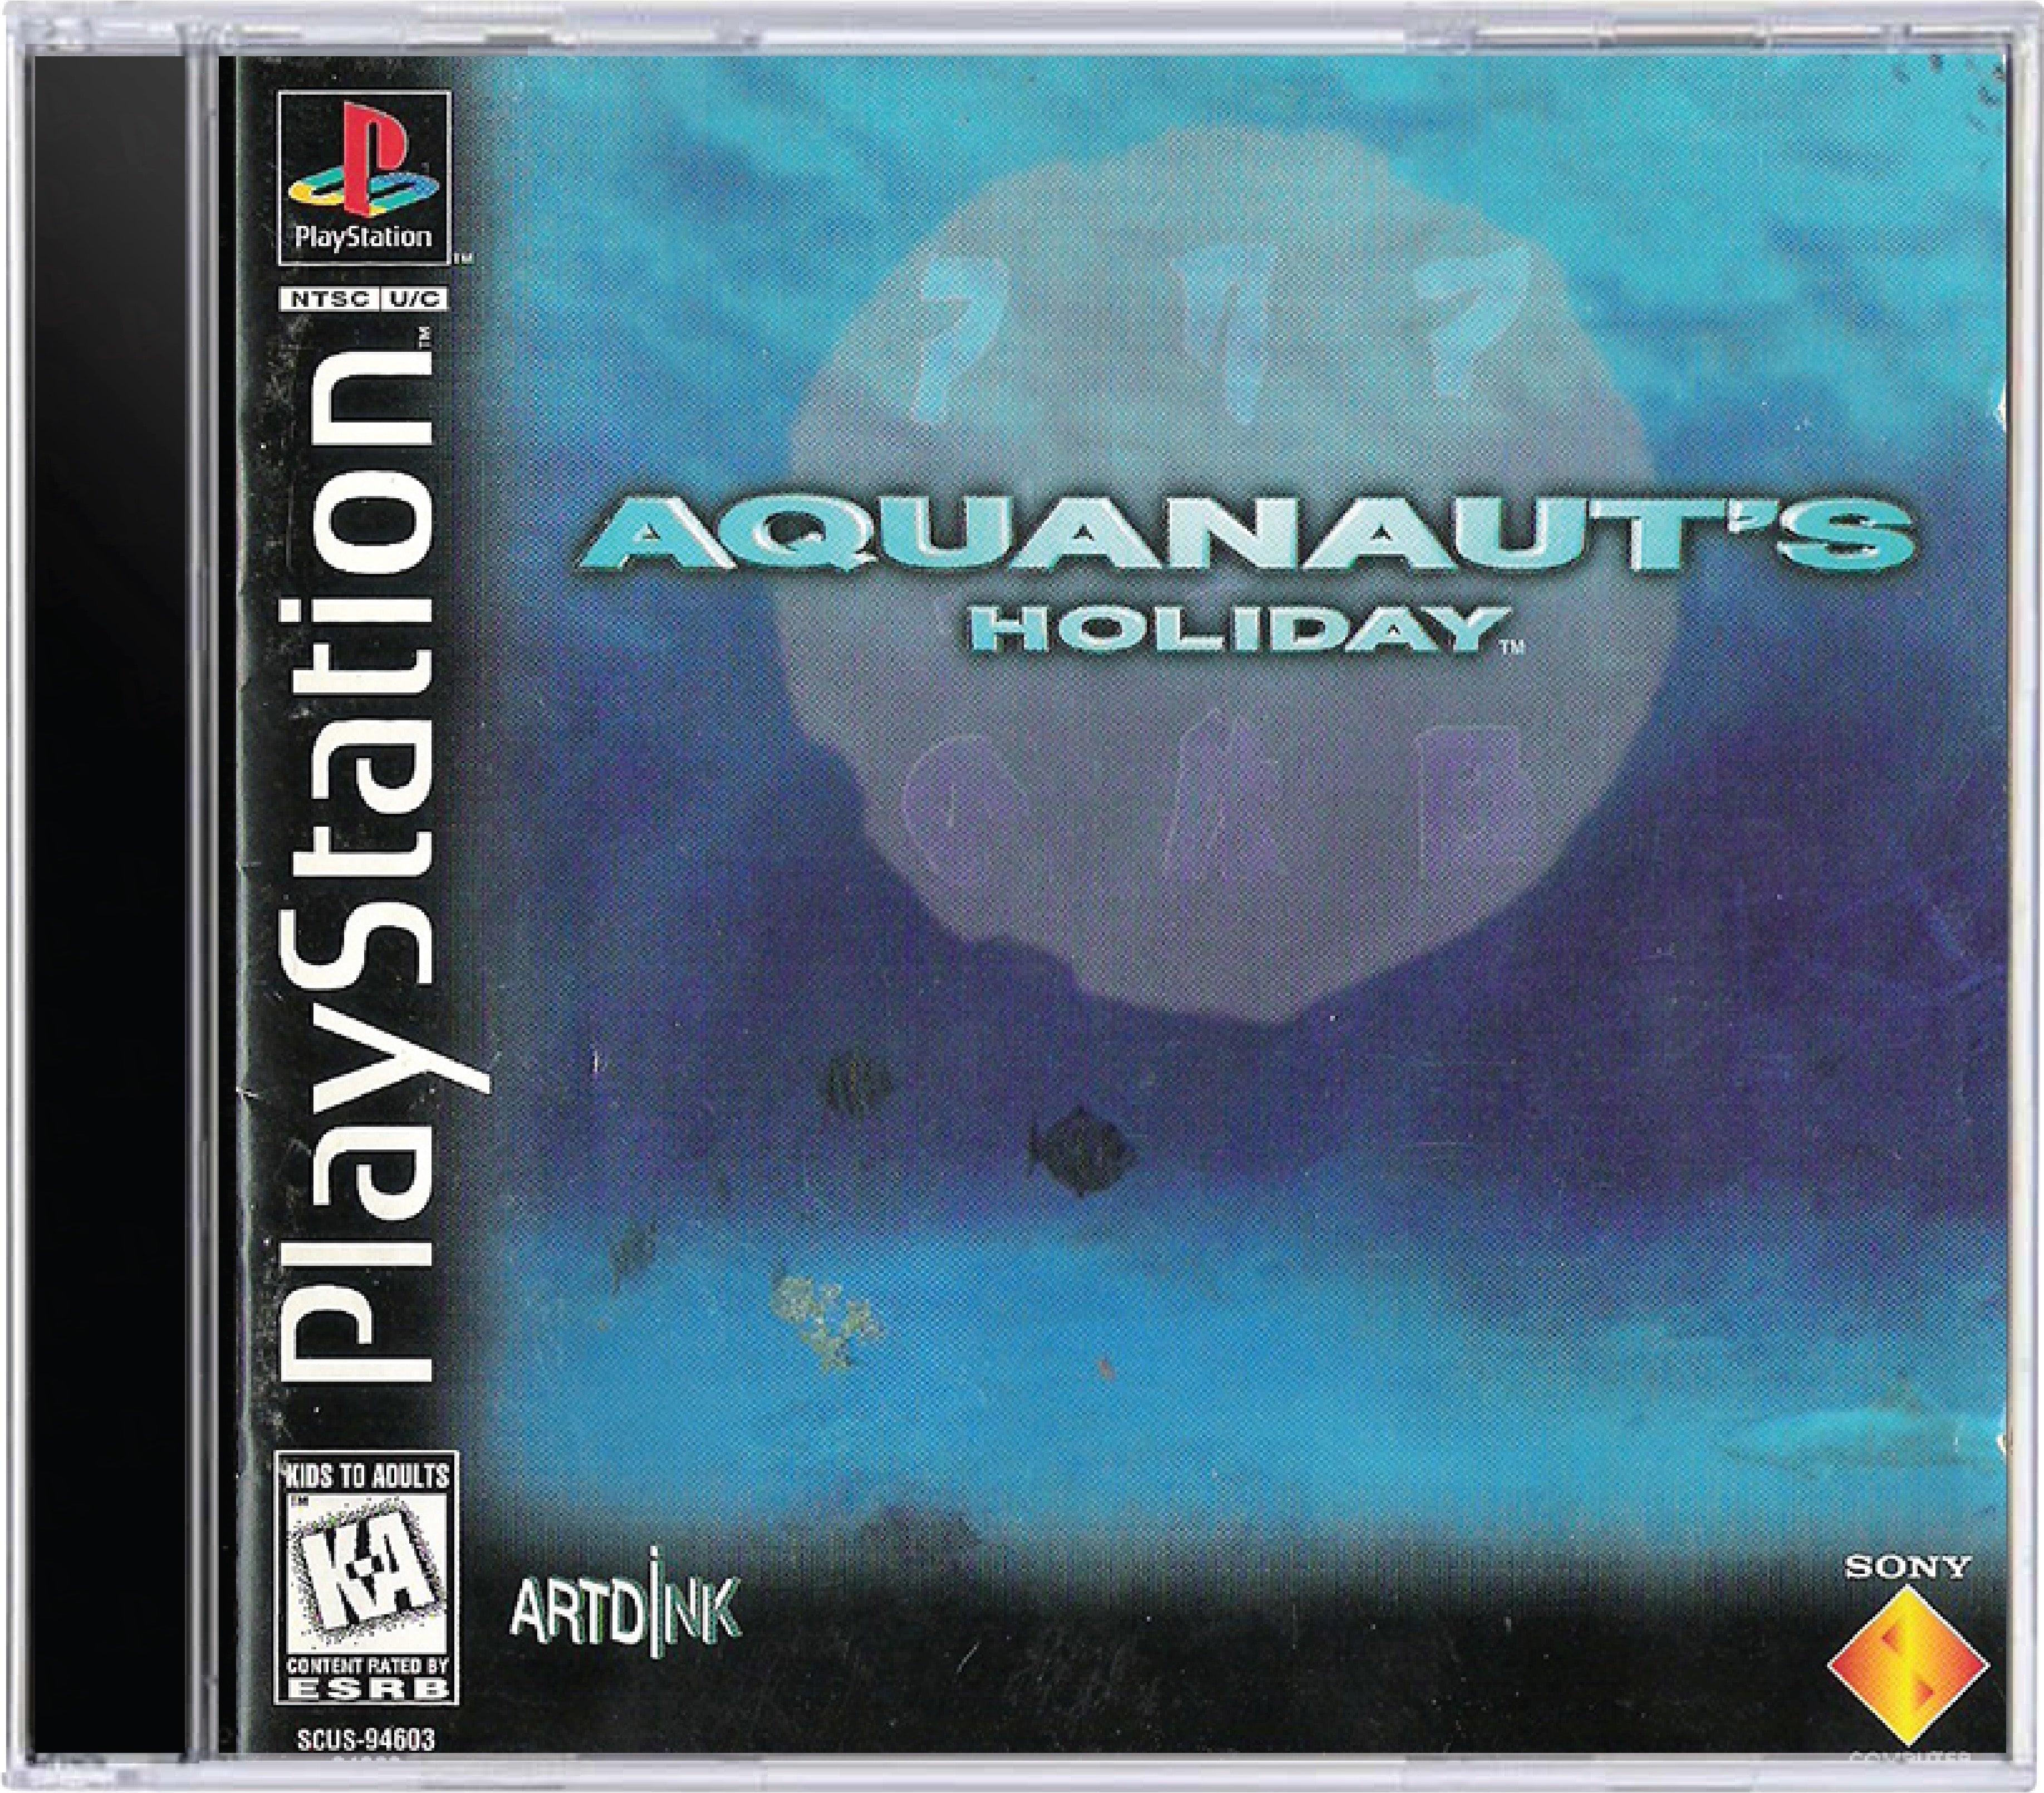 Aquanaut's Holiday Cover Art and Product Photo